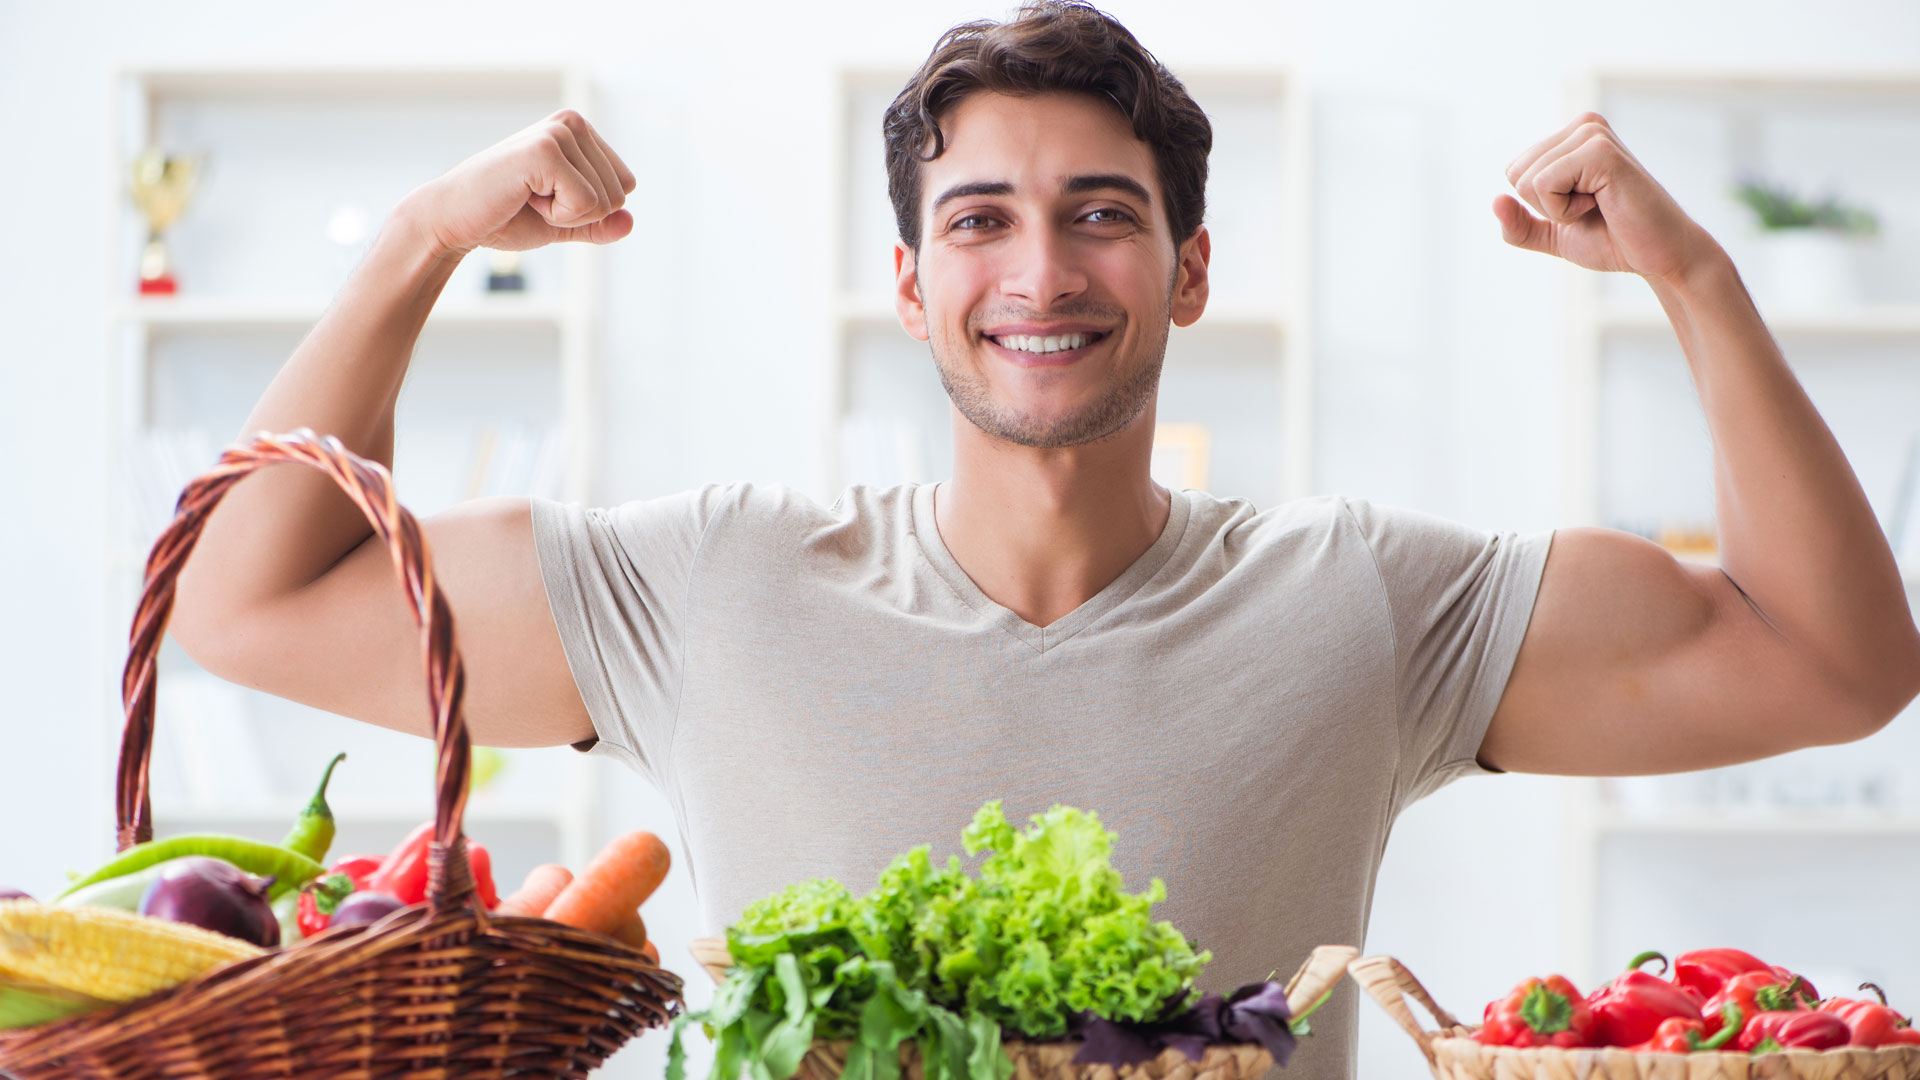 A Men’s Health Perspective on Food and Fitness